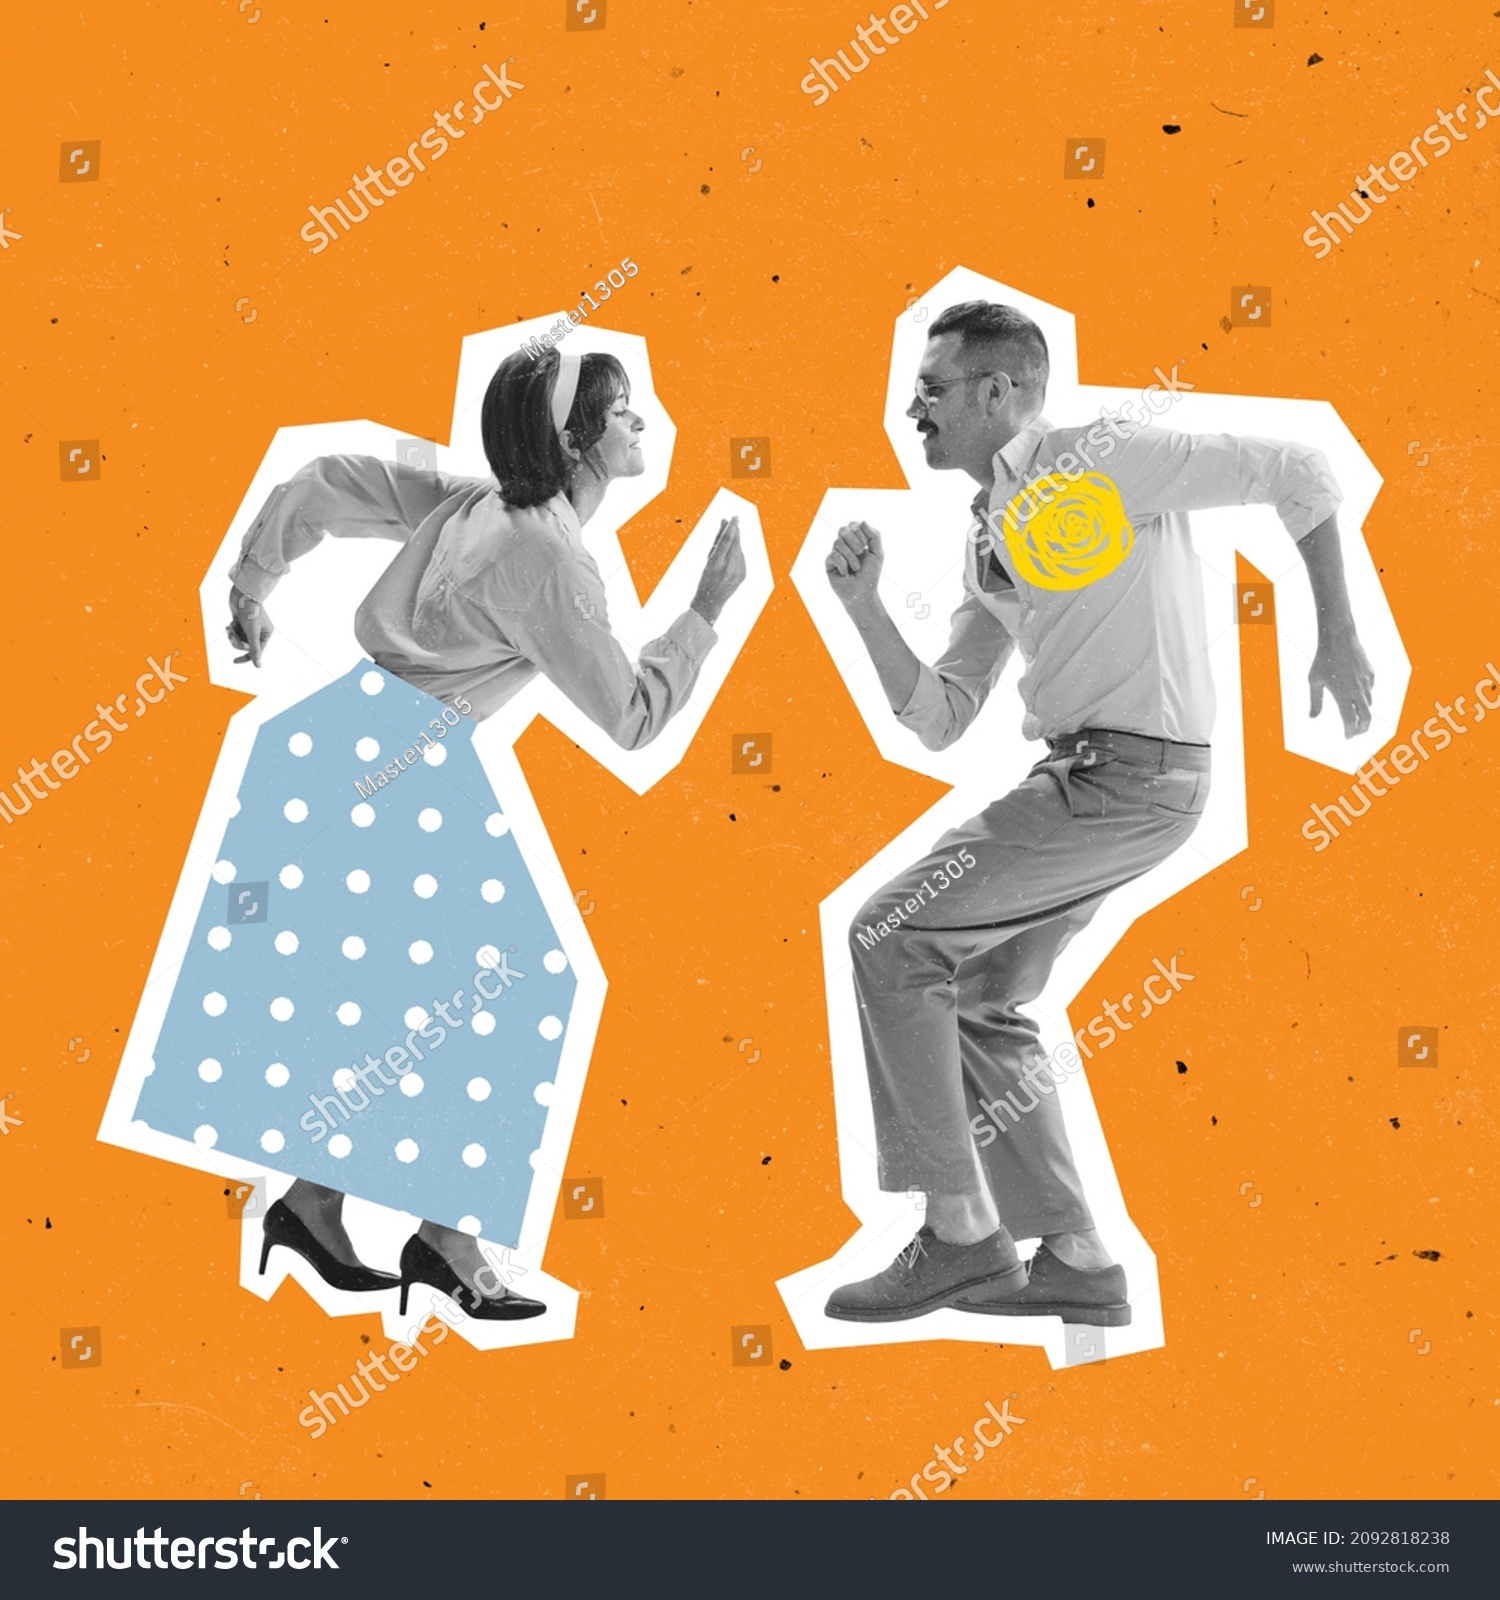 Retro dance. Couple of dnacer dressed in 70s, 80s fashion style dancing rock-and-roll on orange background with drawings. Contemporary art collage. Minimalism. Art, fashion and music. Magazine style #2092818238